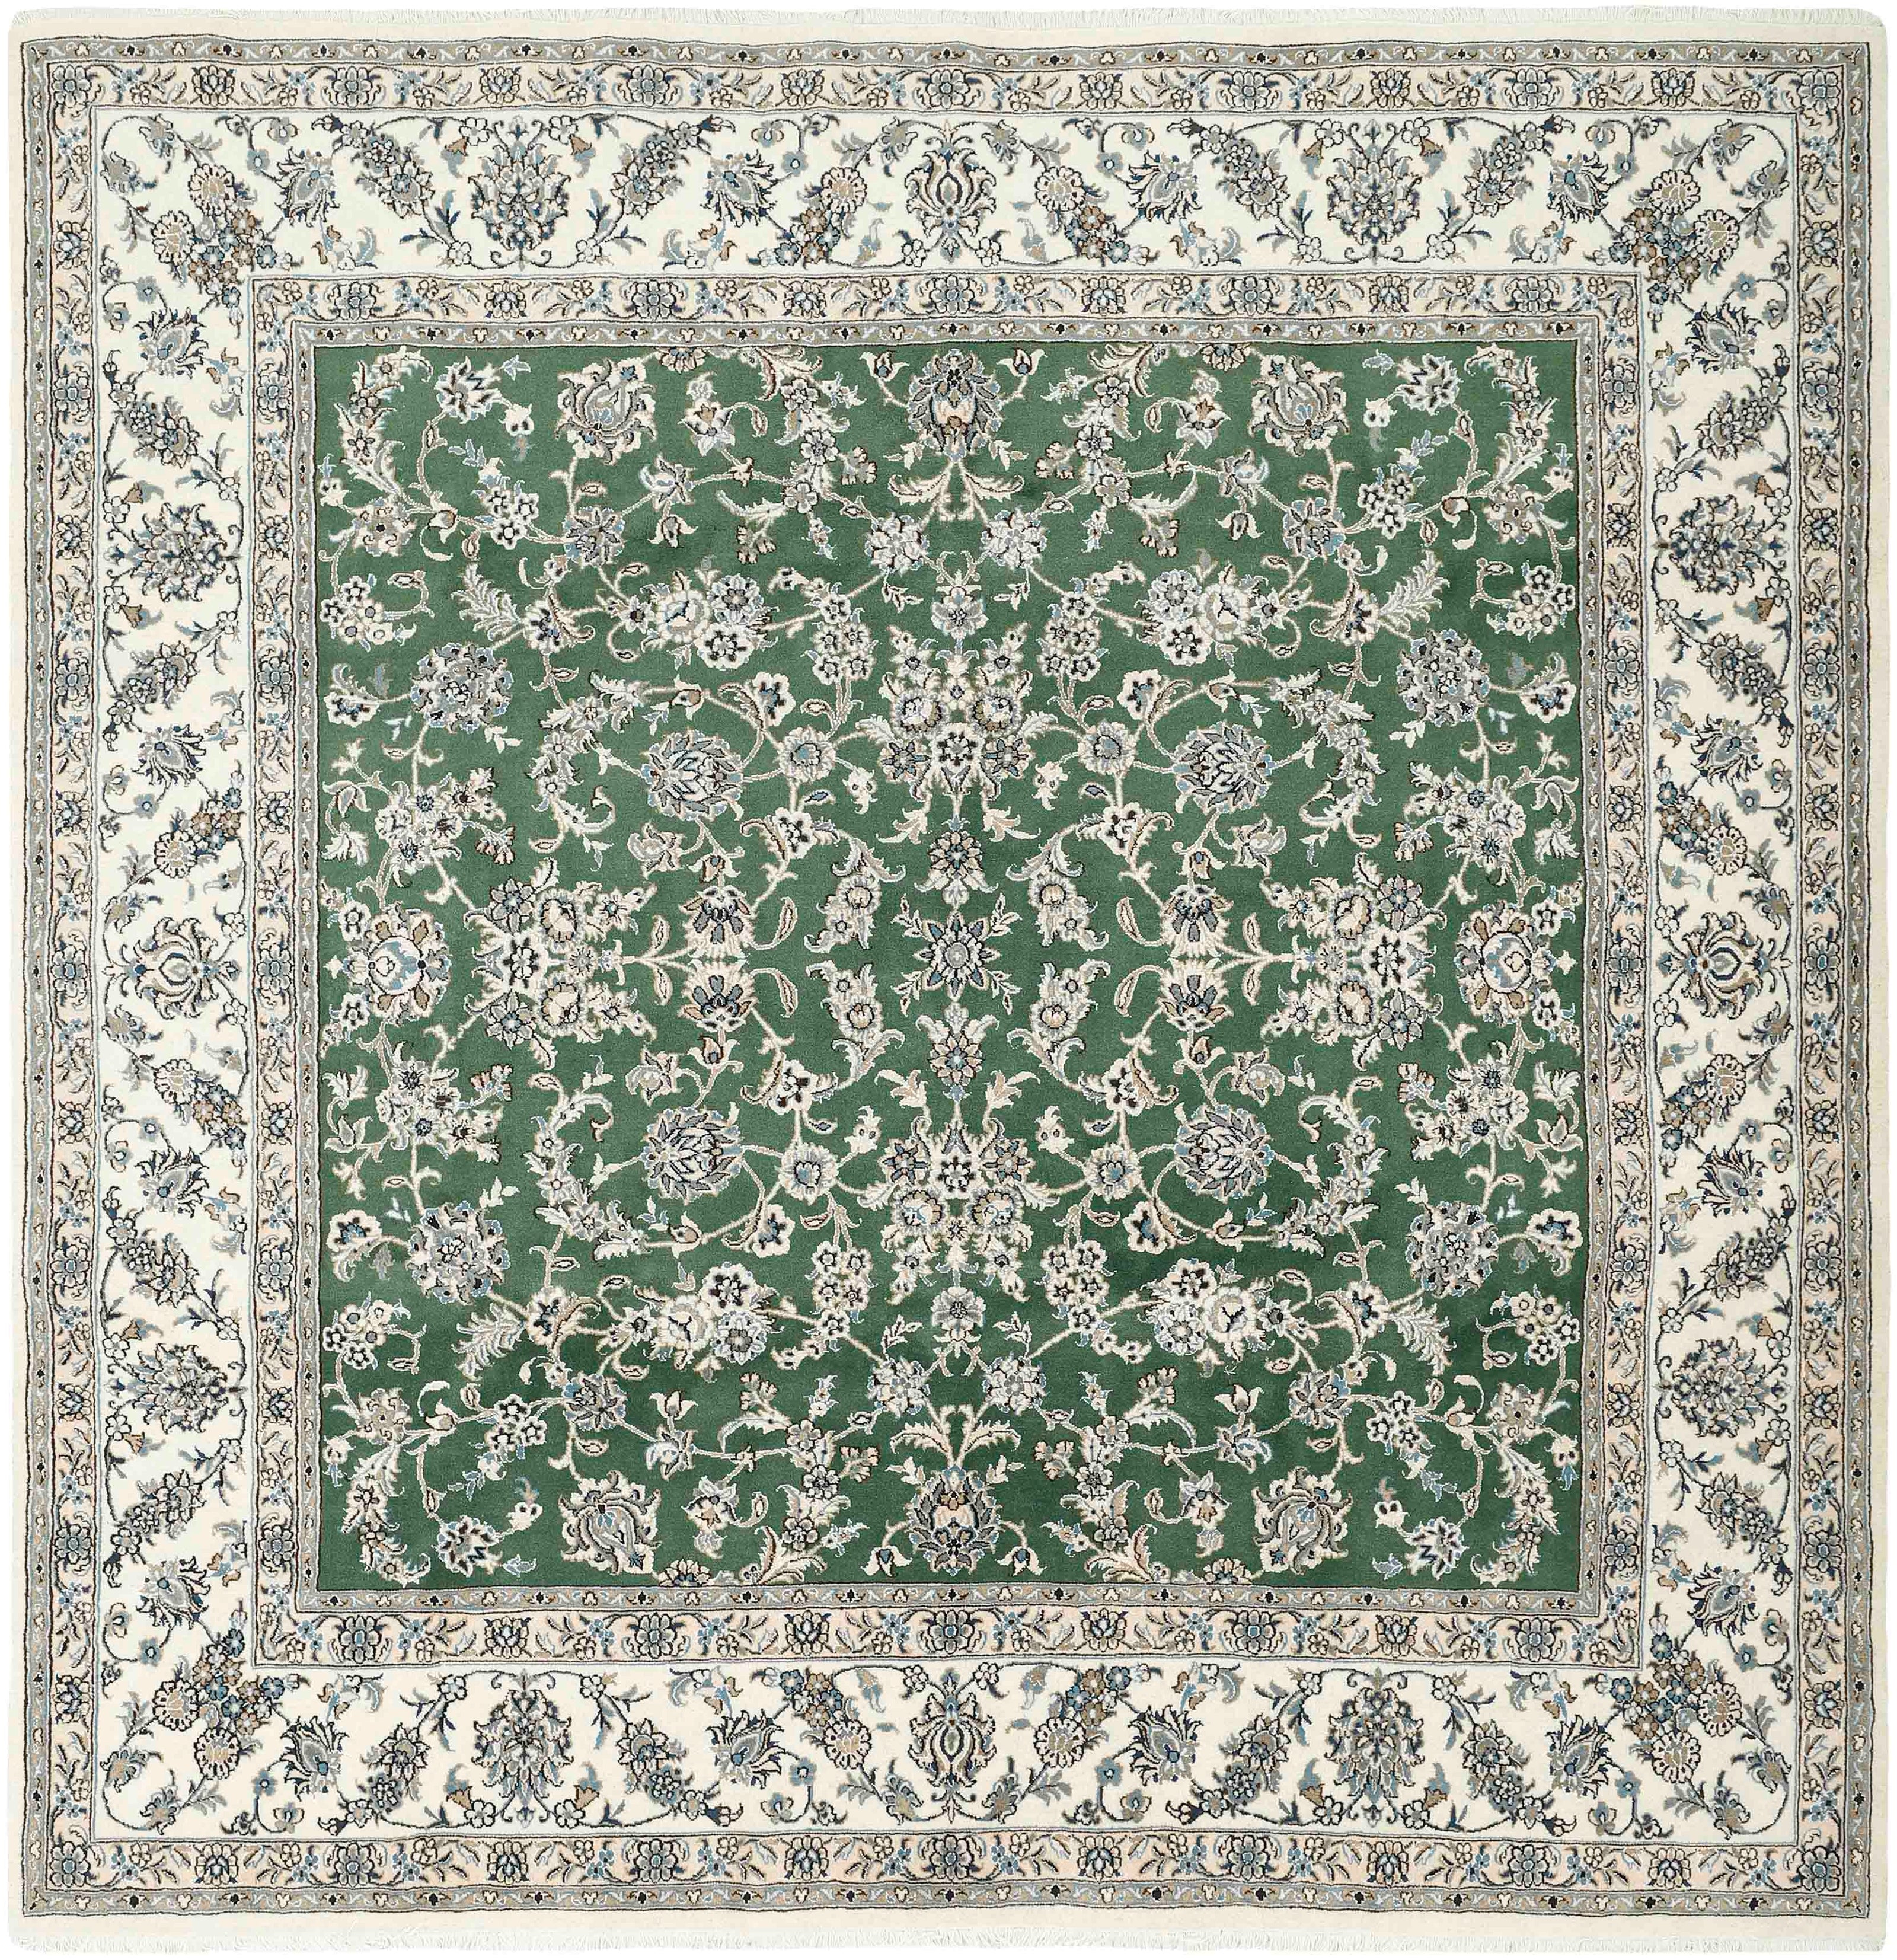 Authentic persian rug with a traditional floral design in green, beige and brown